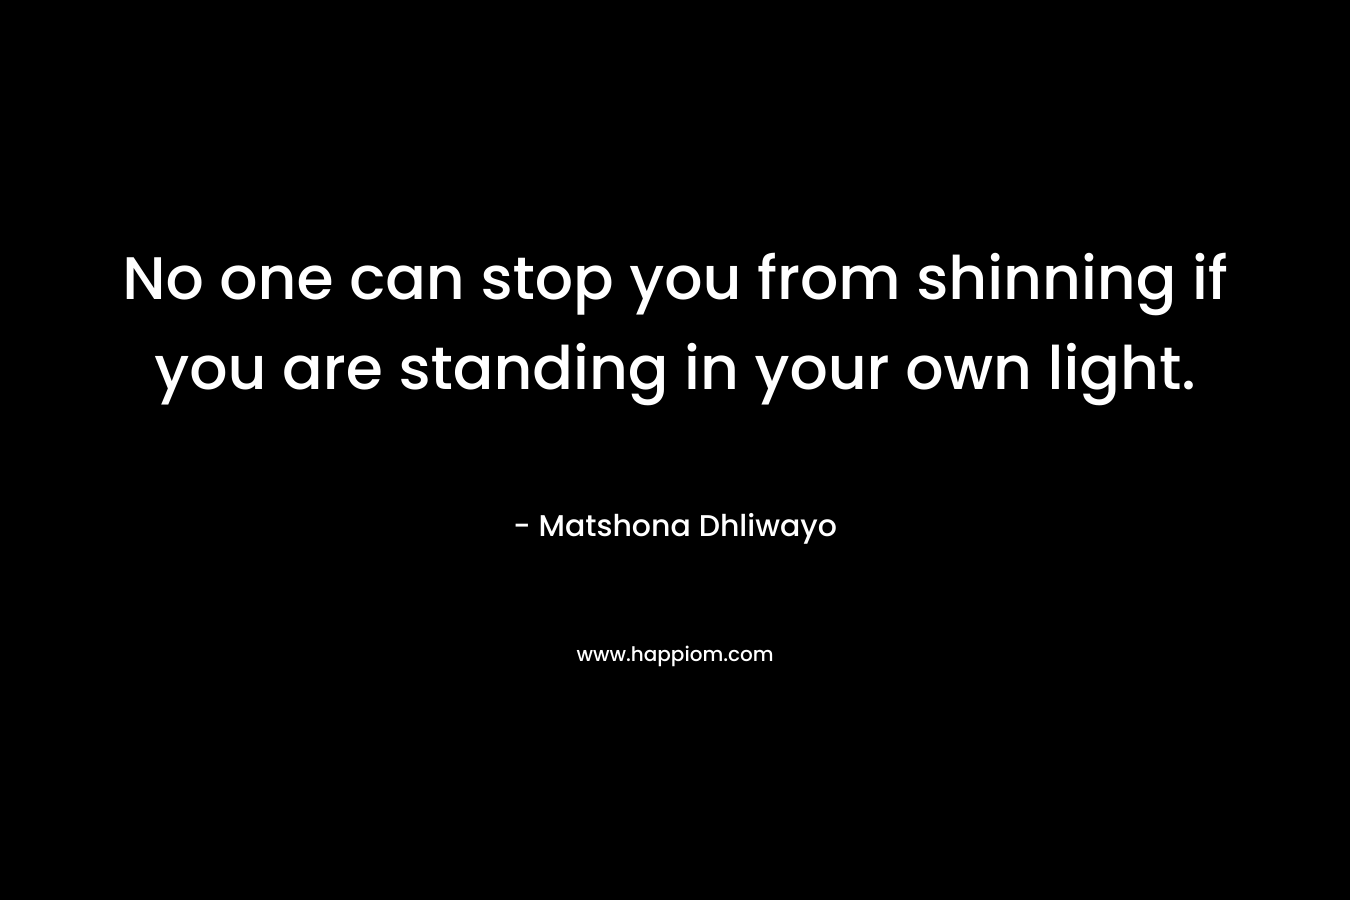 No one can stop you from shinning if you are standing in your own light.